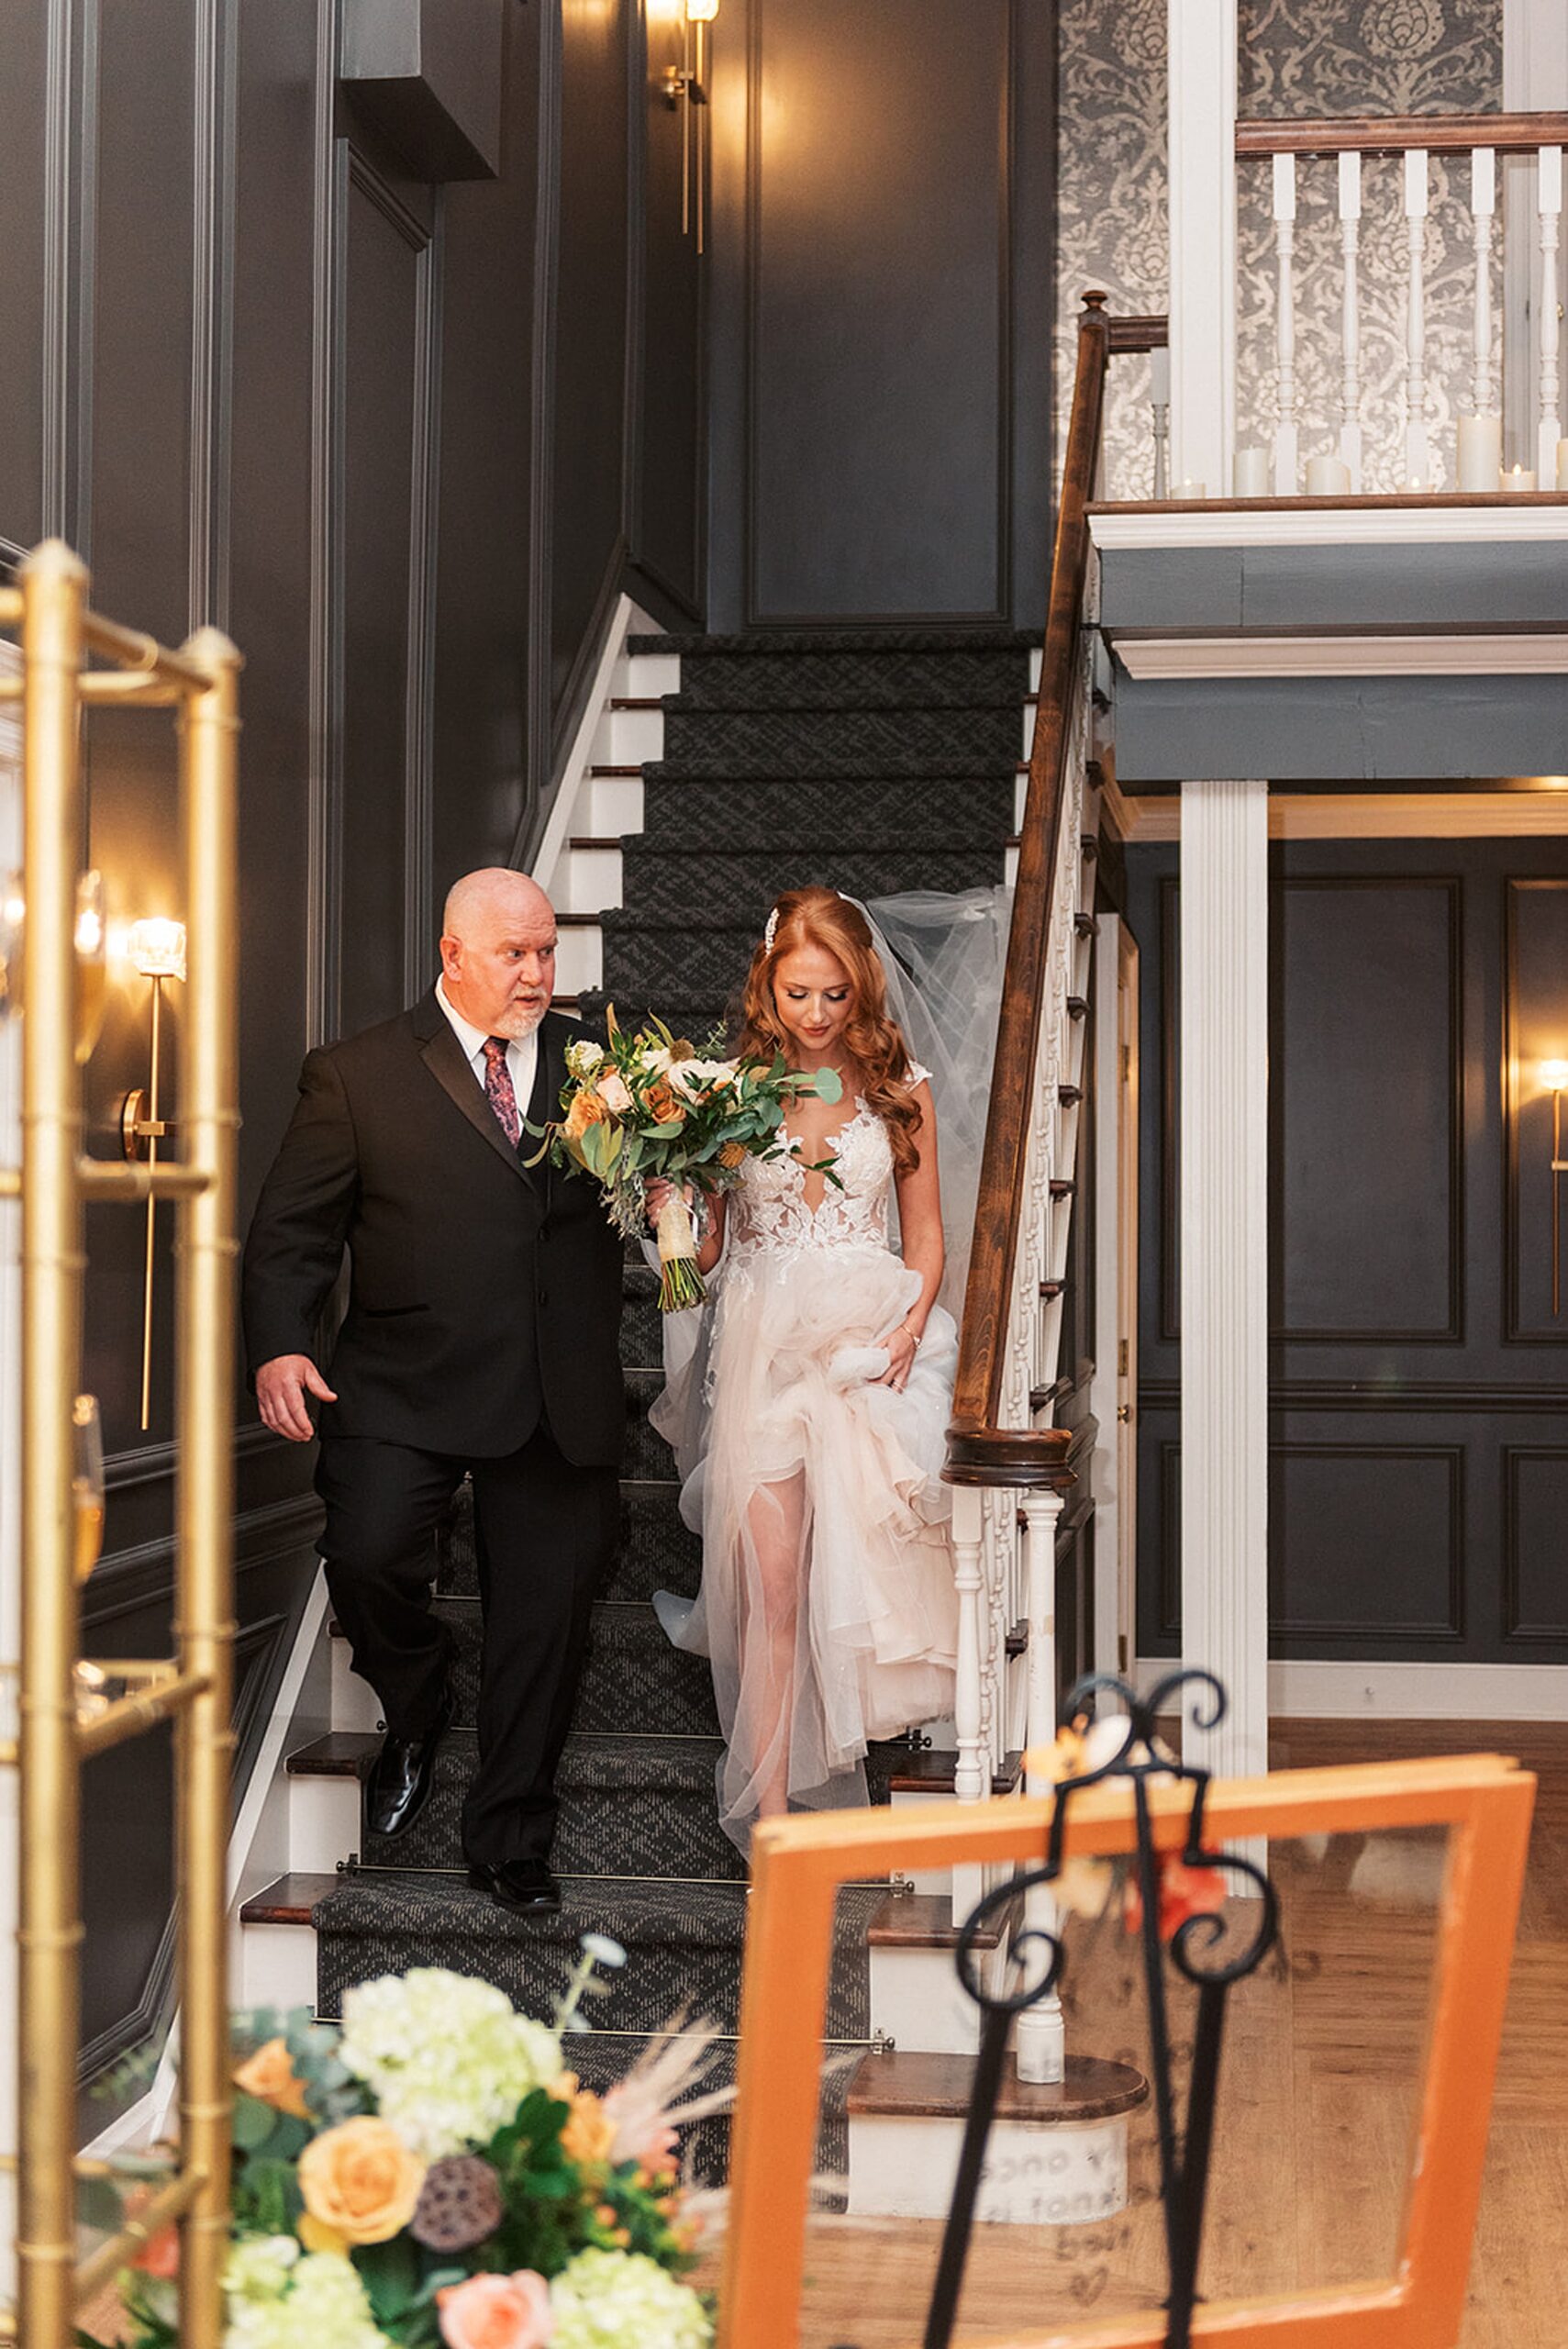 A father walks his daughter in to her wedding ceremony down a flight of stairs in a white lace dress at a David's country inn wedding